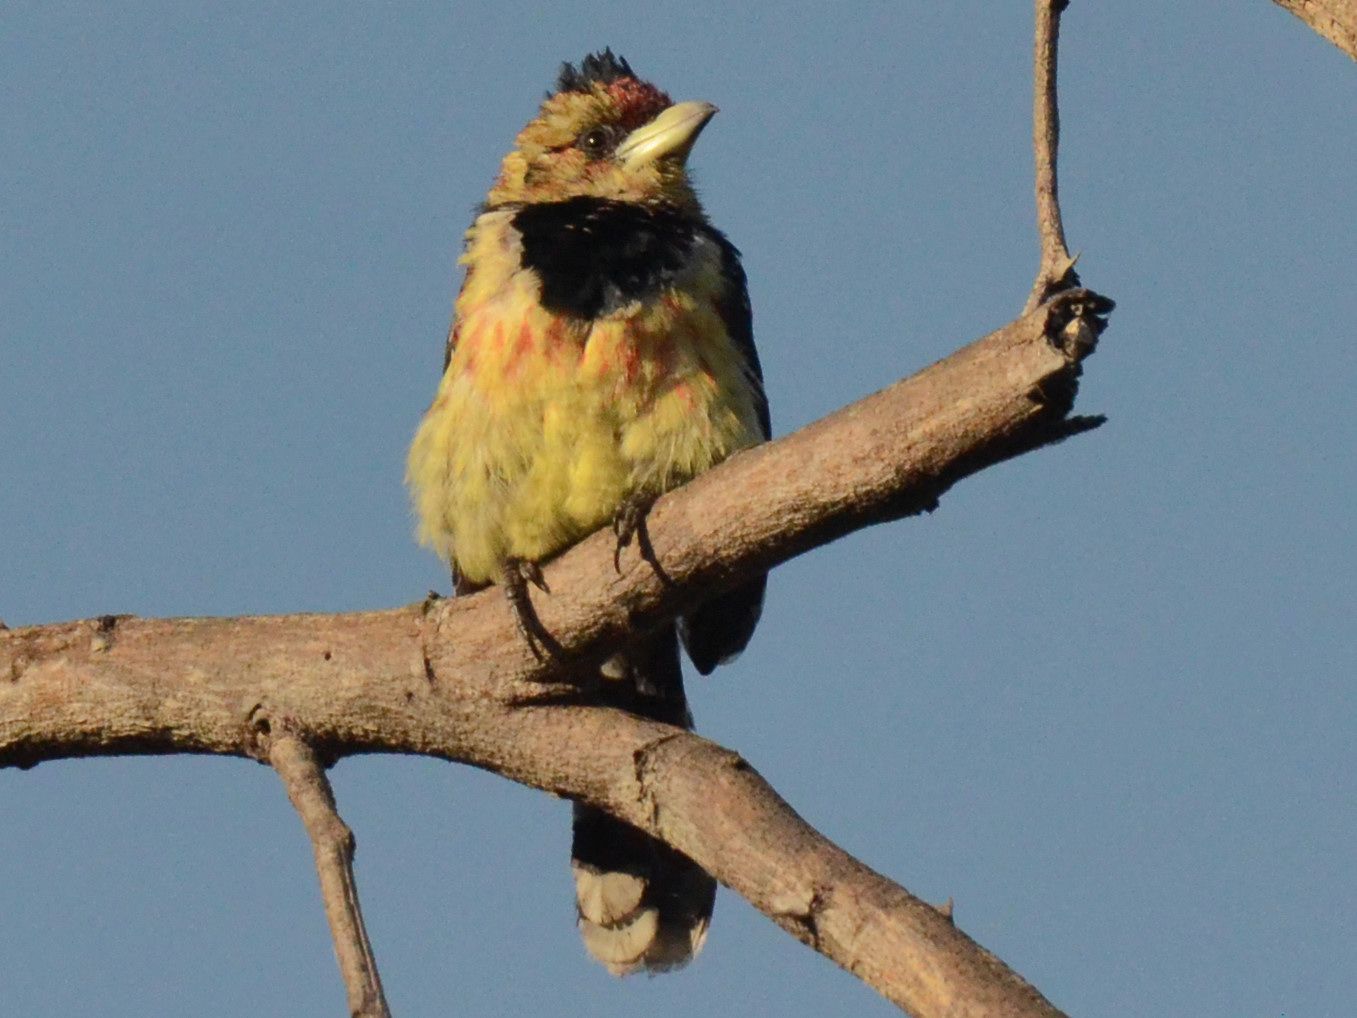 Click picture to see more Crested Barbets.